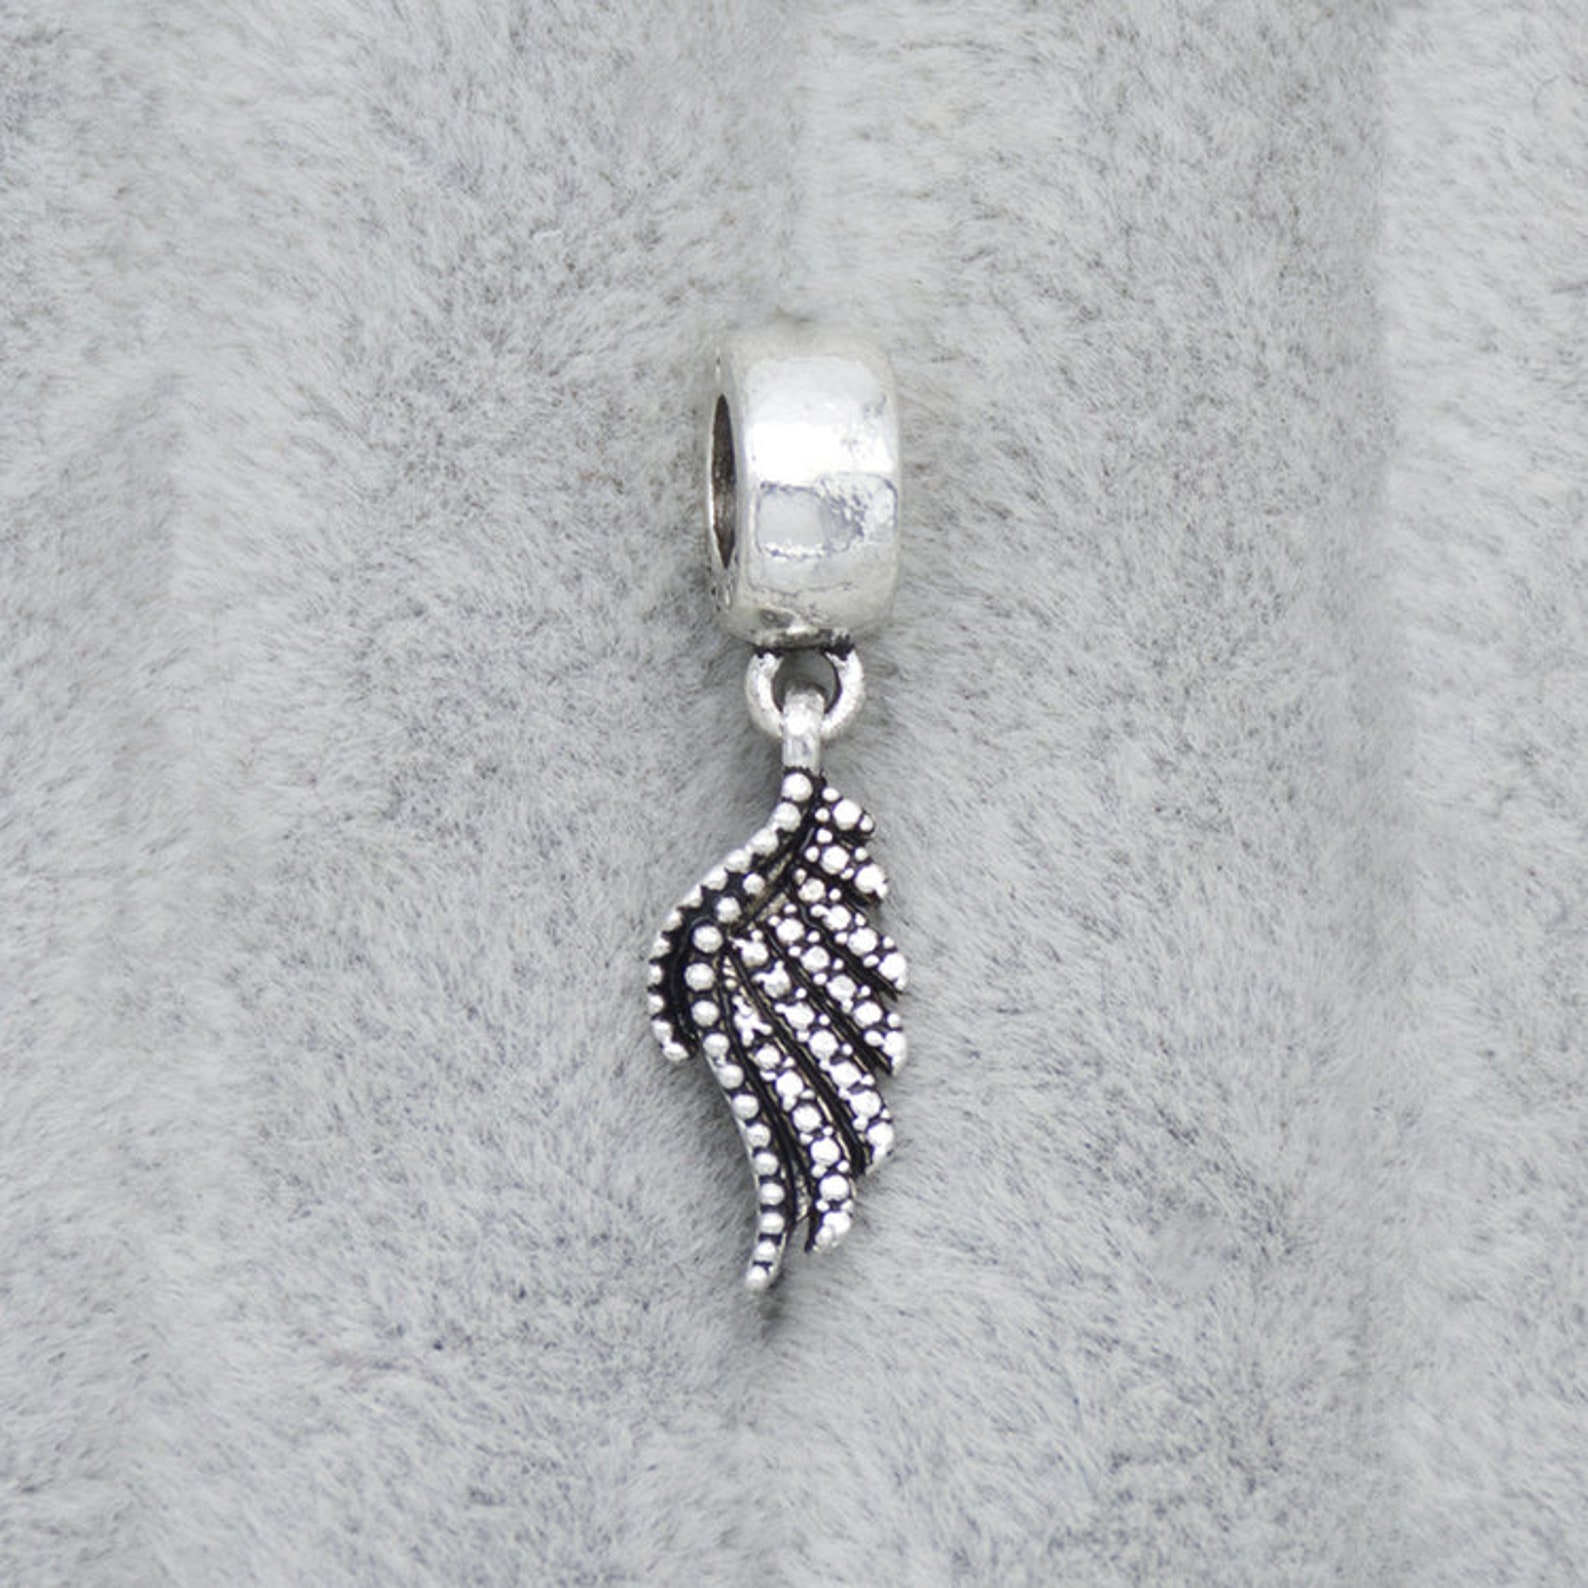 silver alloy angel wing ballet shoes bell bead pendant big hole beads loose bead fit european charm bracelets craft